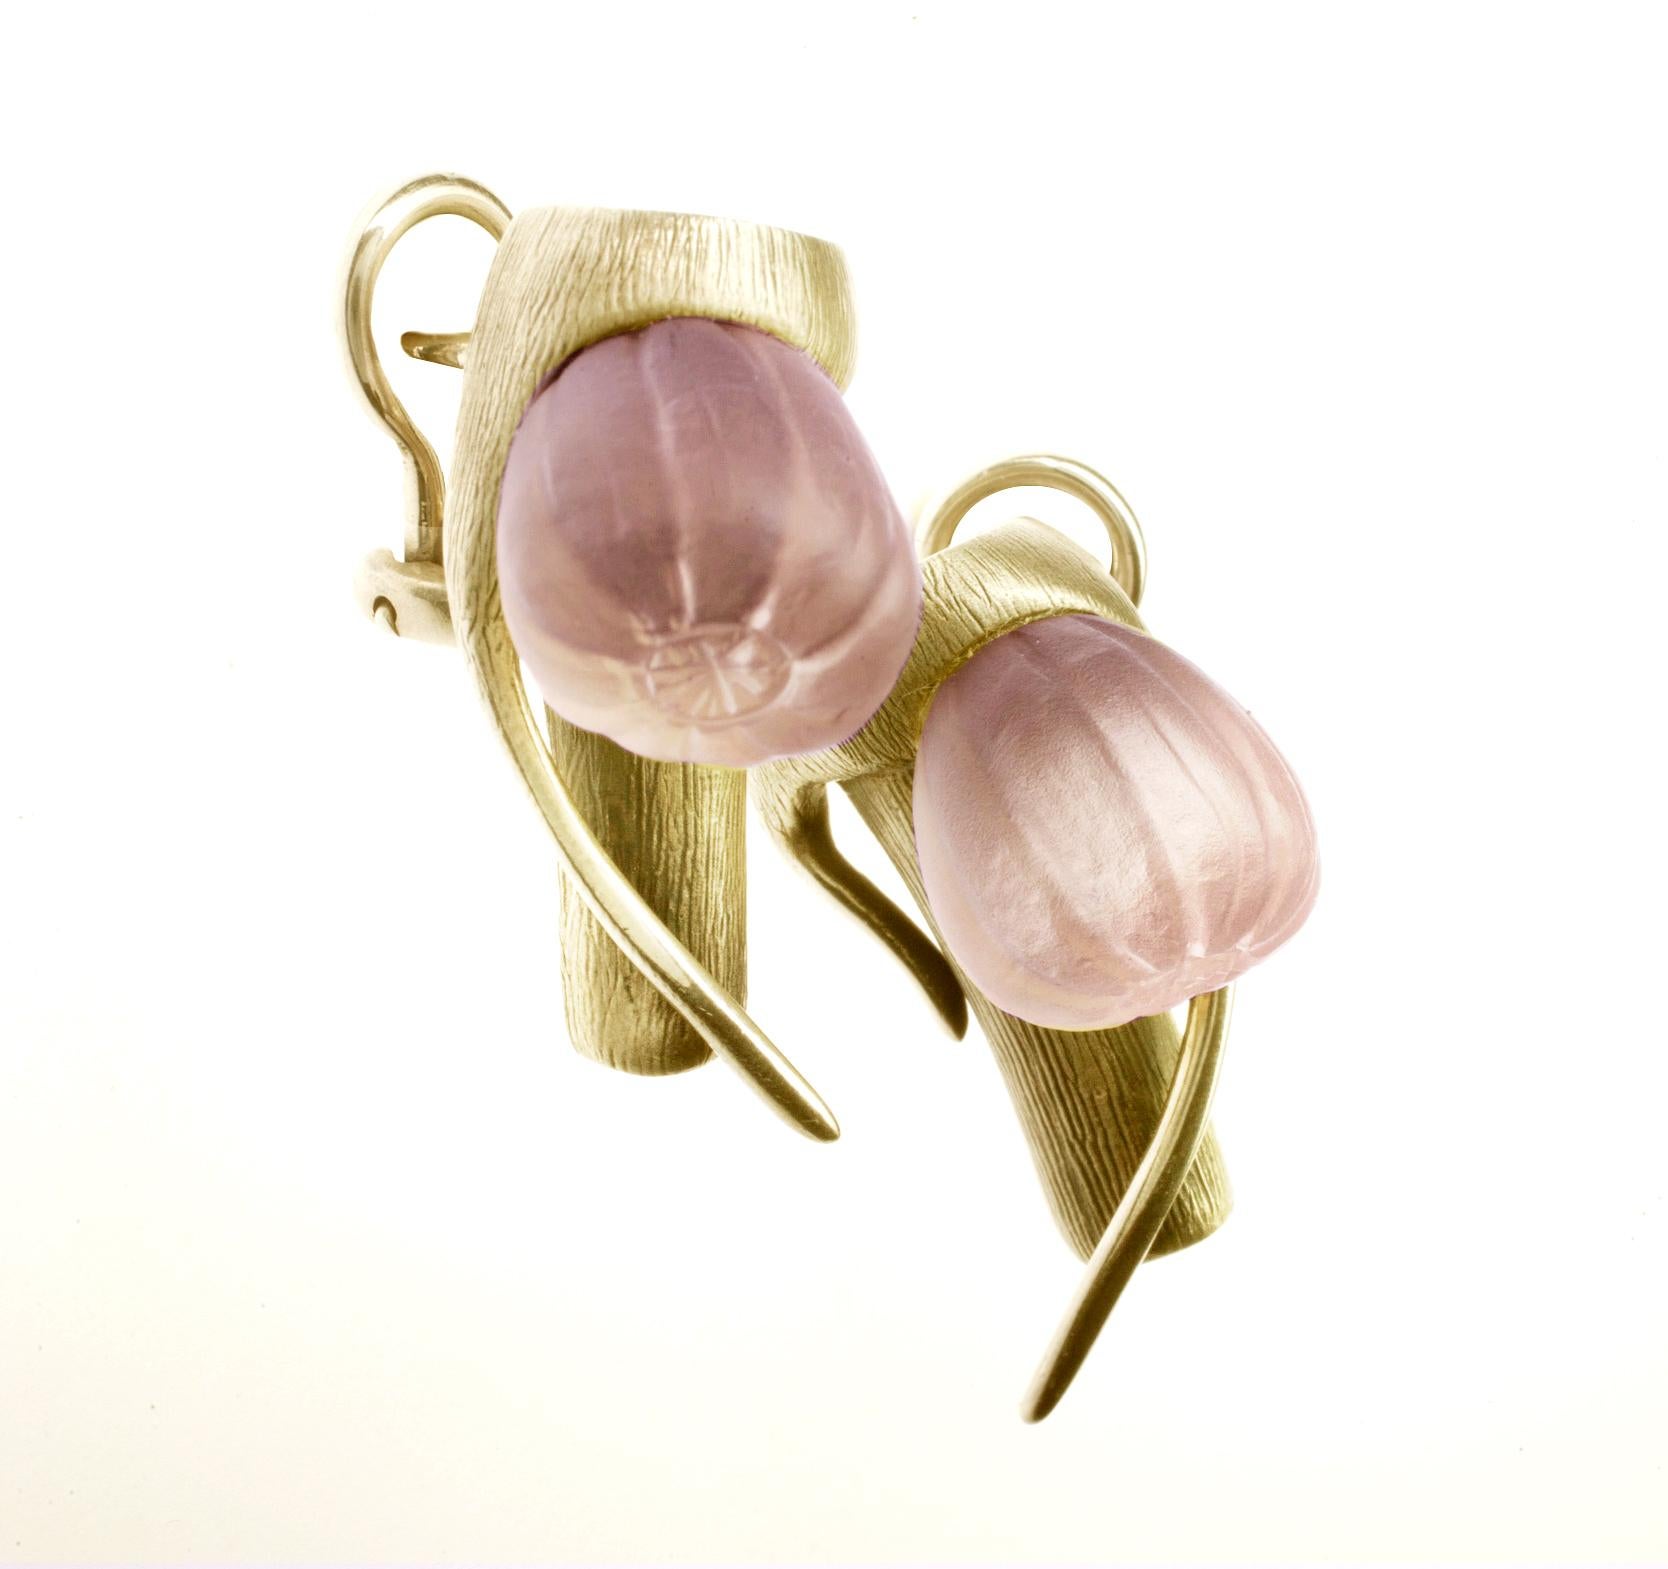 These contemporary Fig cocktail earrings are in 18 karat yellow gold with pink onyx. The collection was featured in Harper's Bazaar UA editorial, published issue. The earrings were chosen for the 64th Berlinale Film Festival red carpet by the